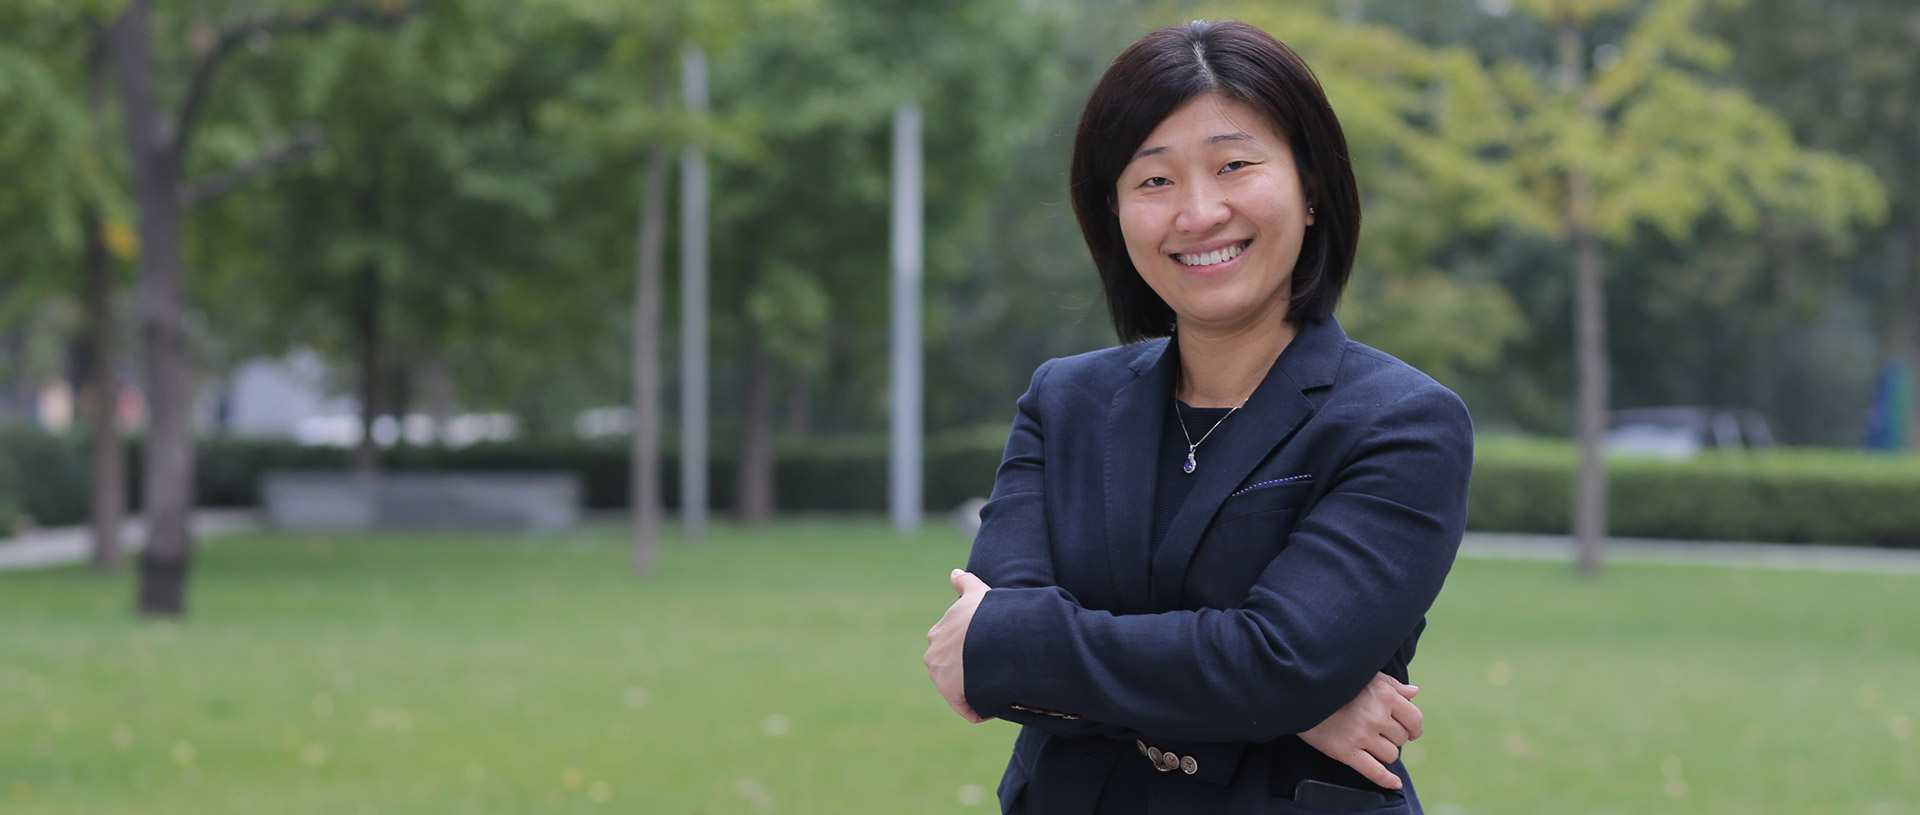 Through the lens of VC: GGV Capital’s Jenny Lee on unicorn traits and more